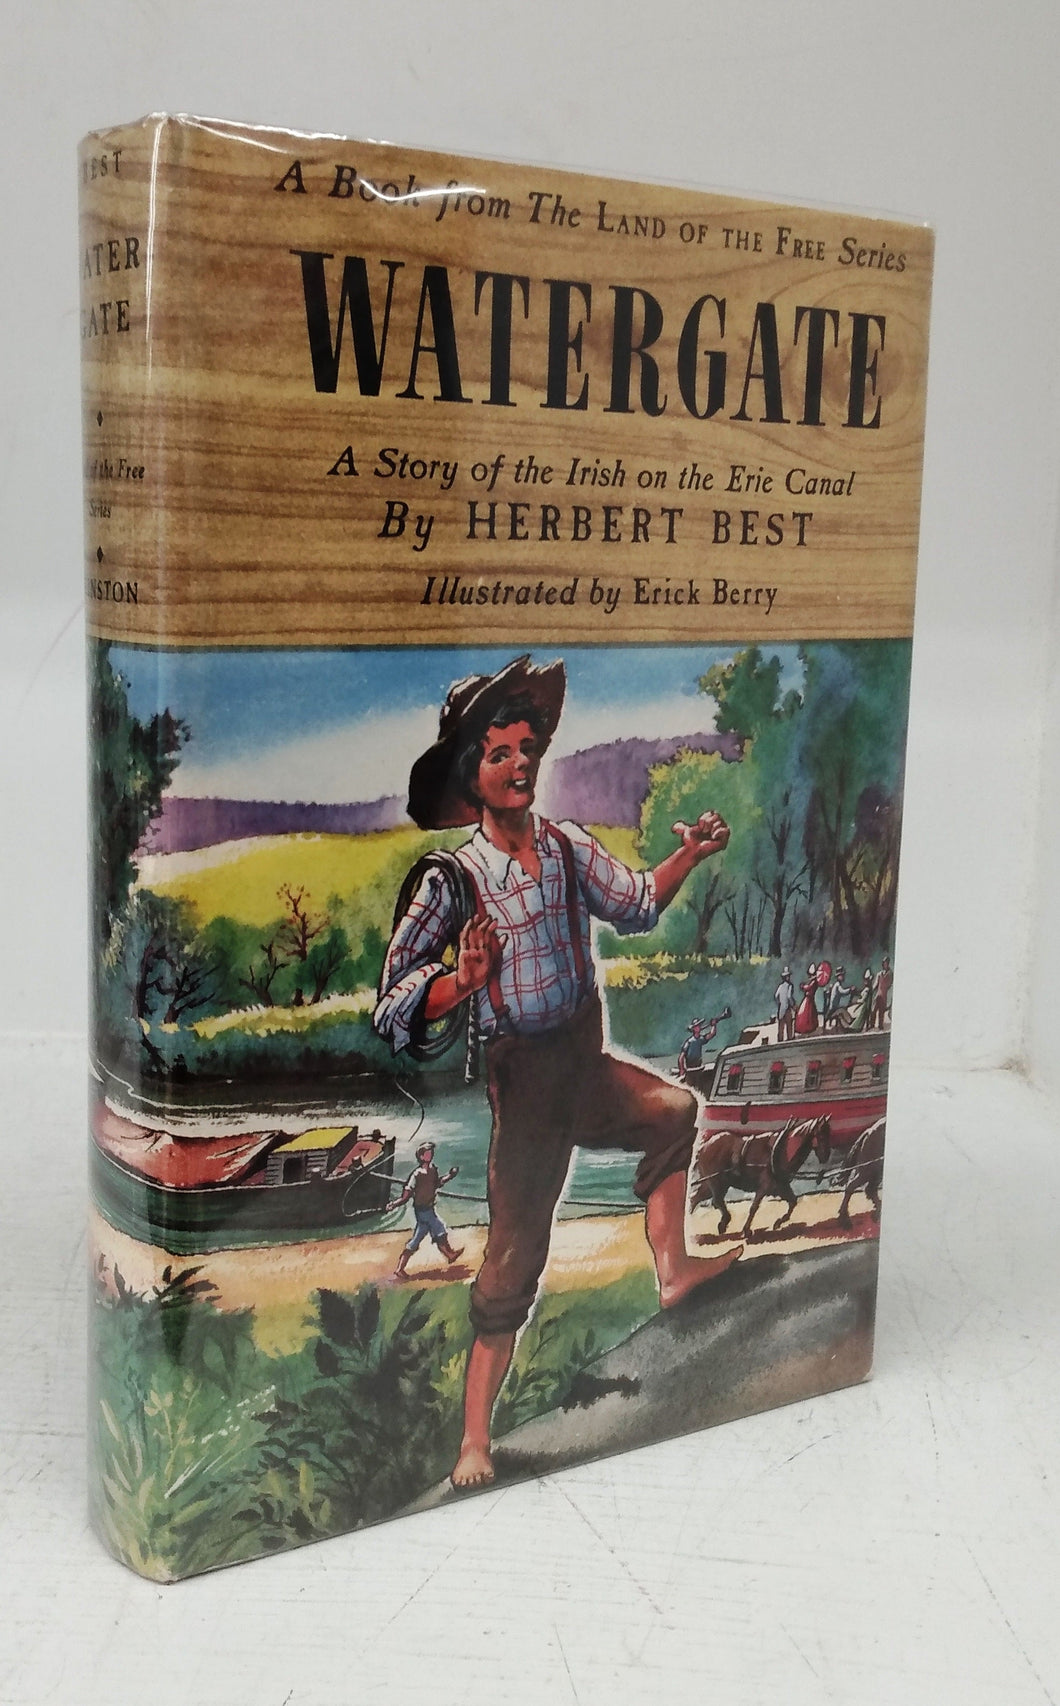 Watergate: A Story of the Irish on the Erie Canal